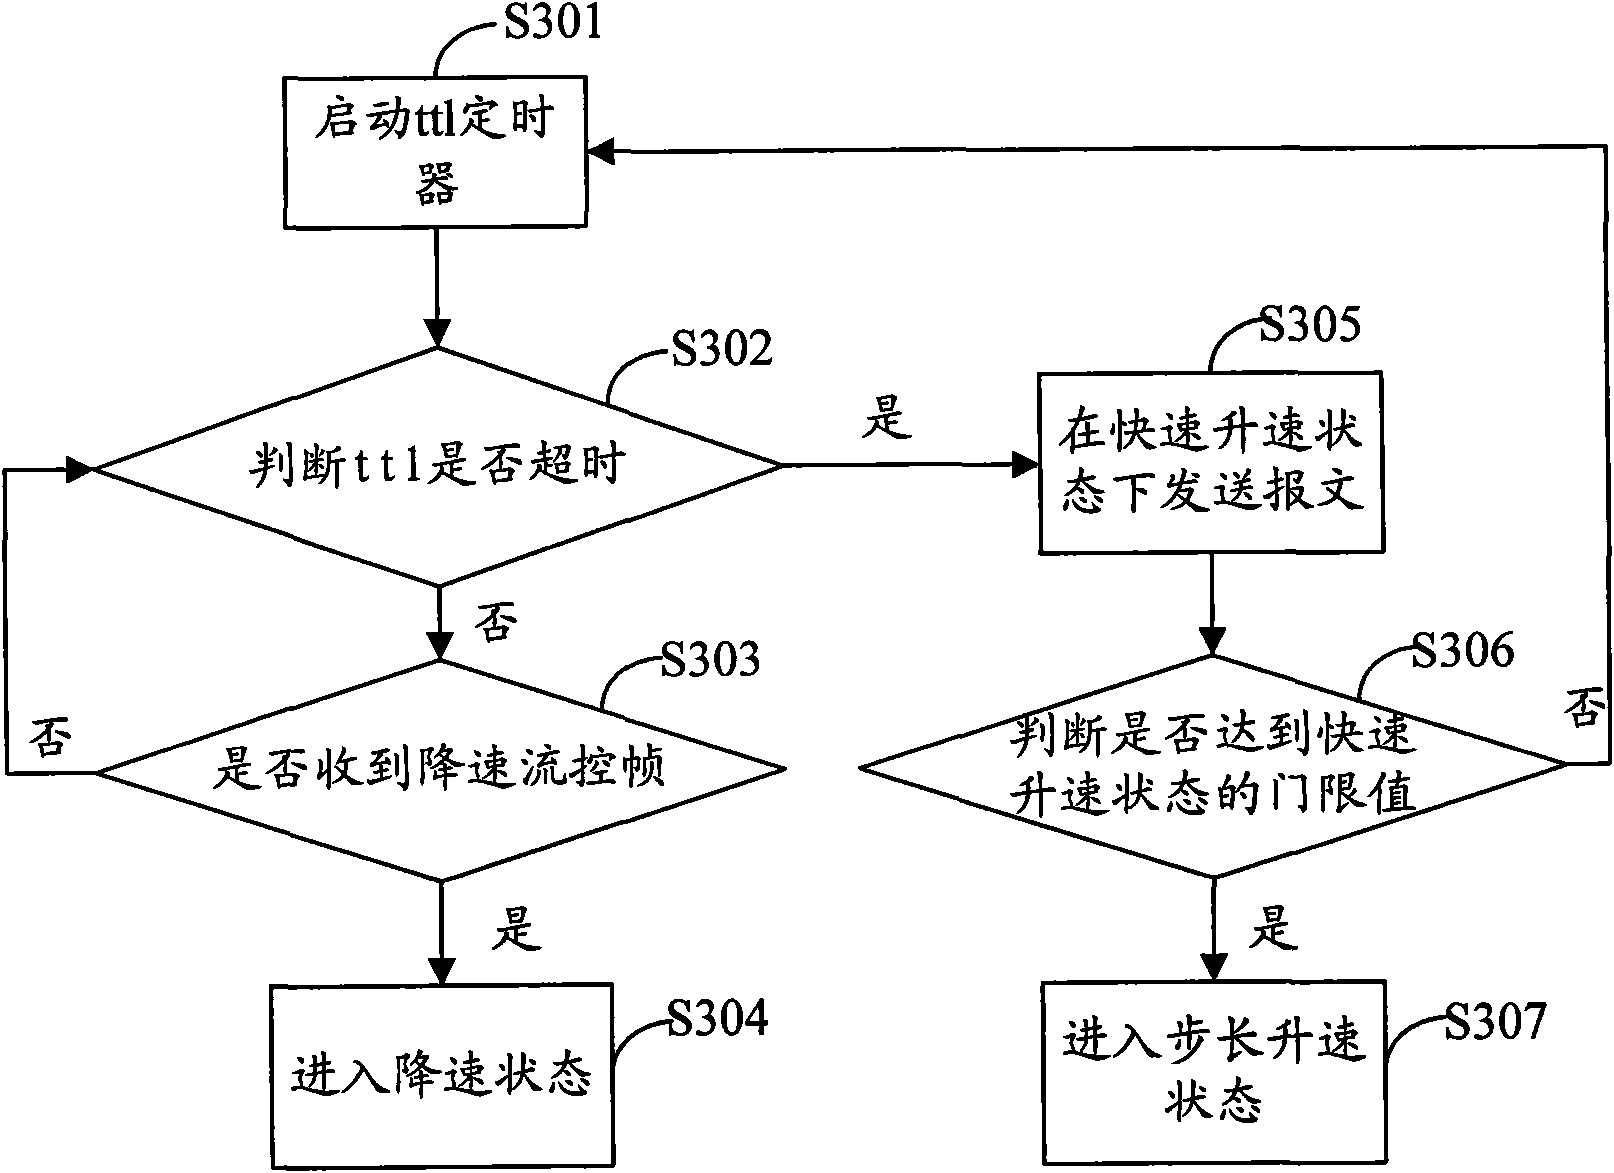 Message flux control method and base station controller